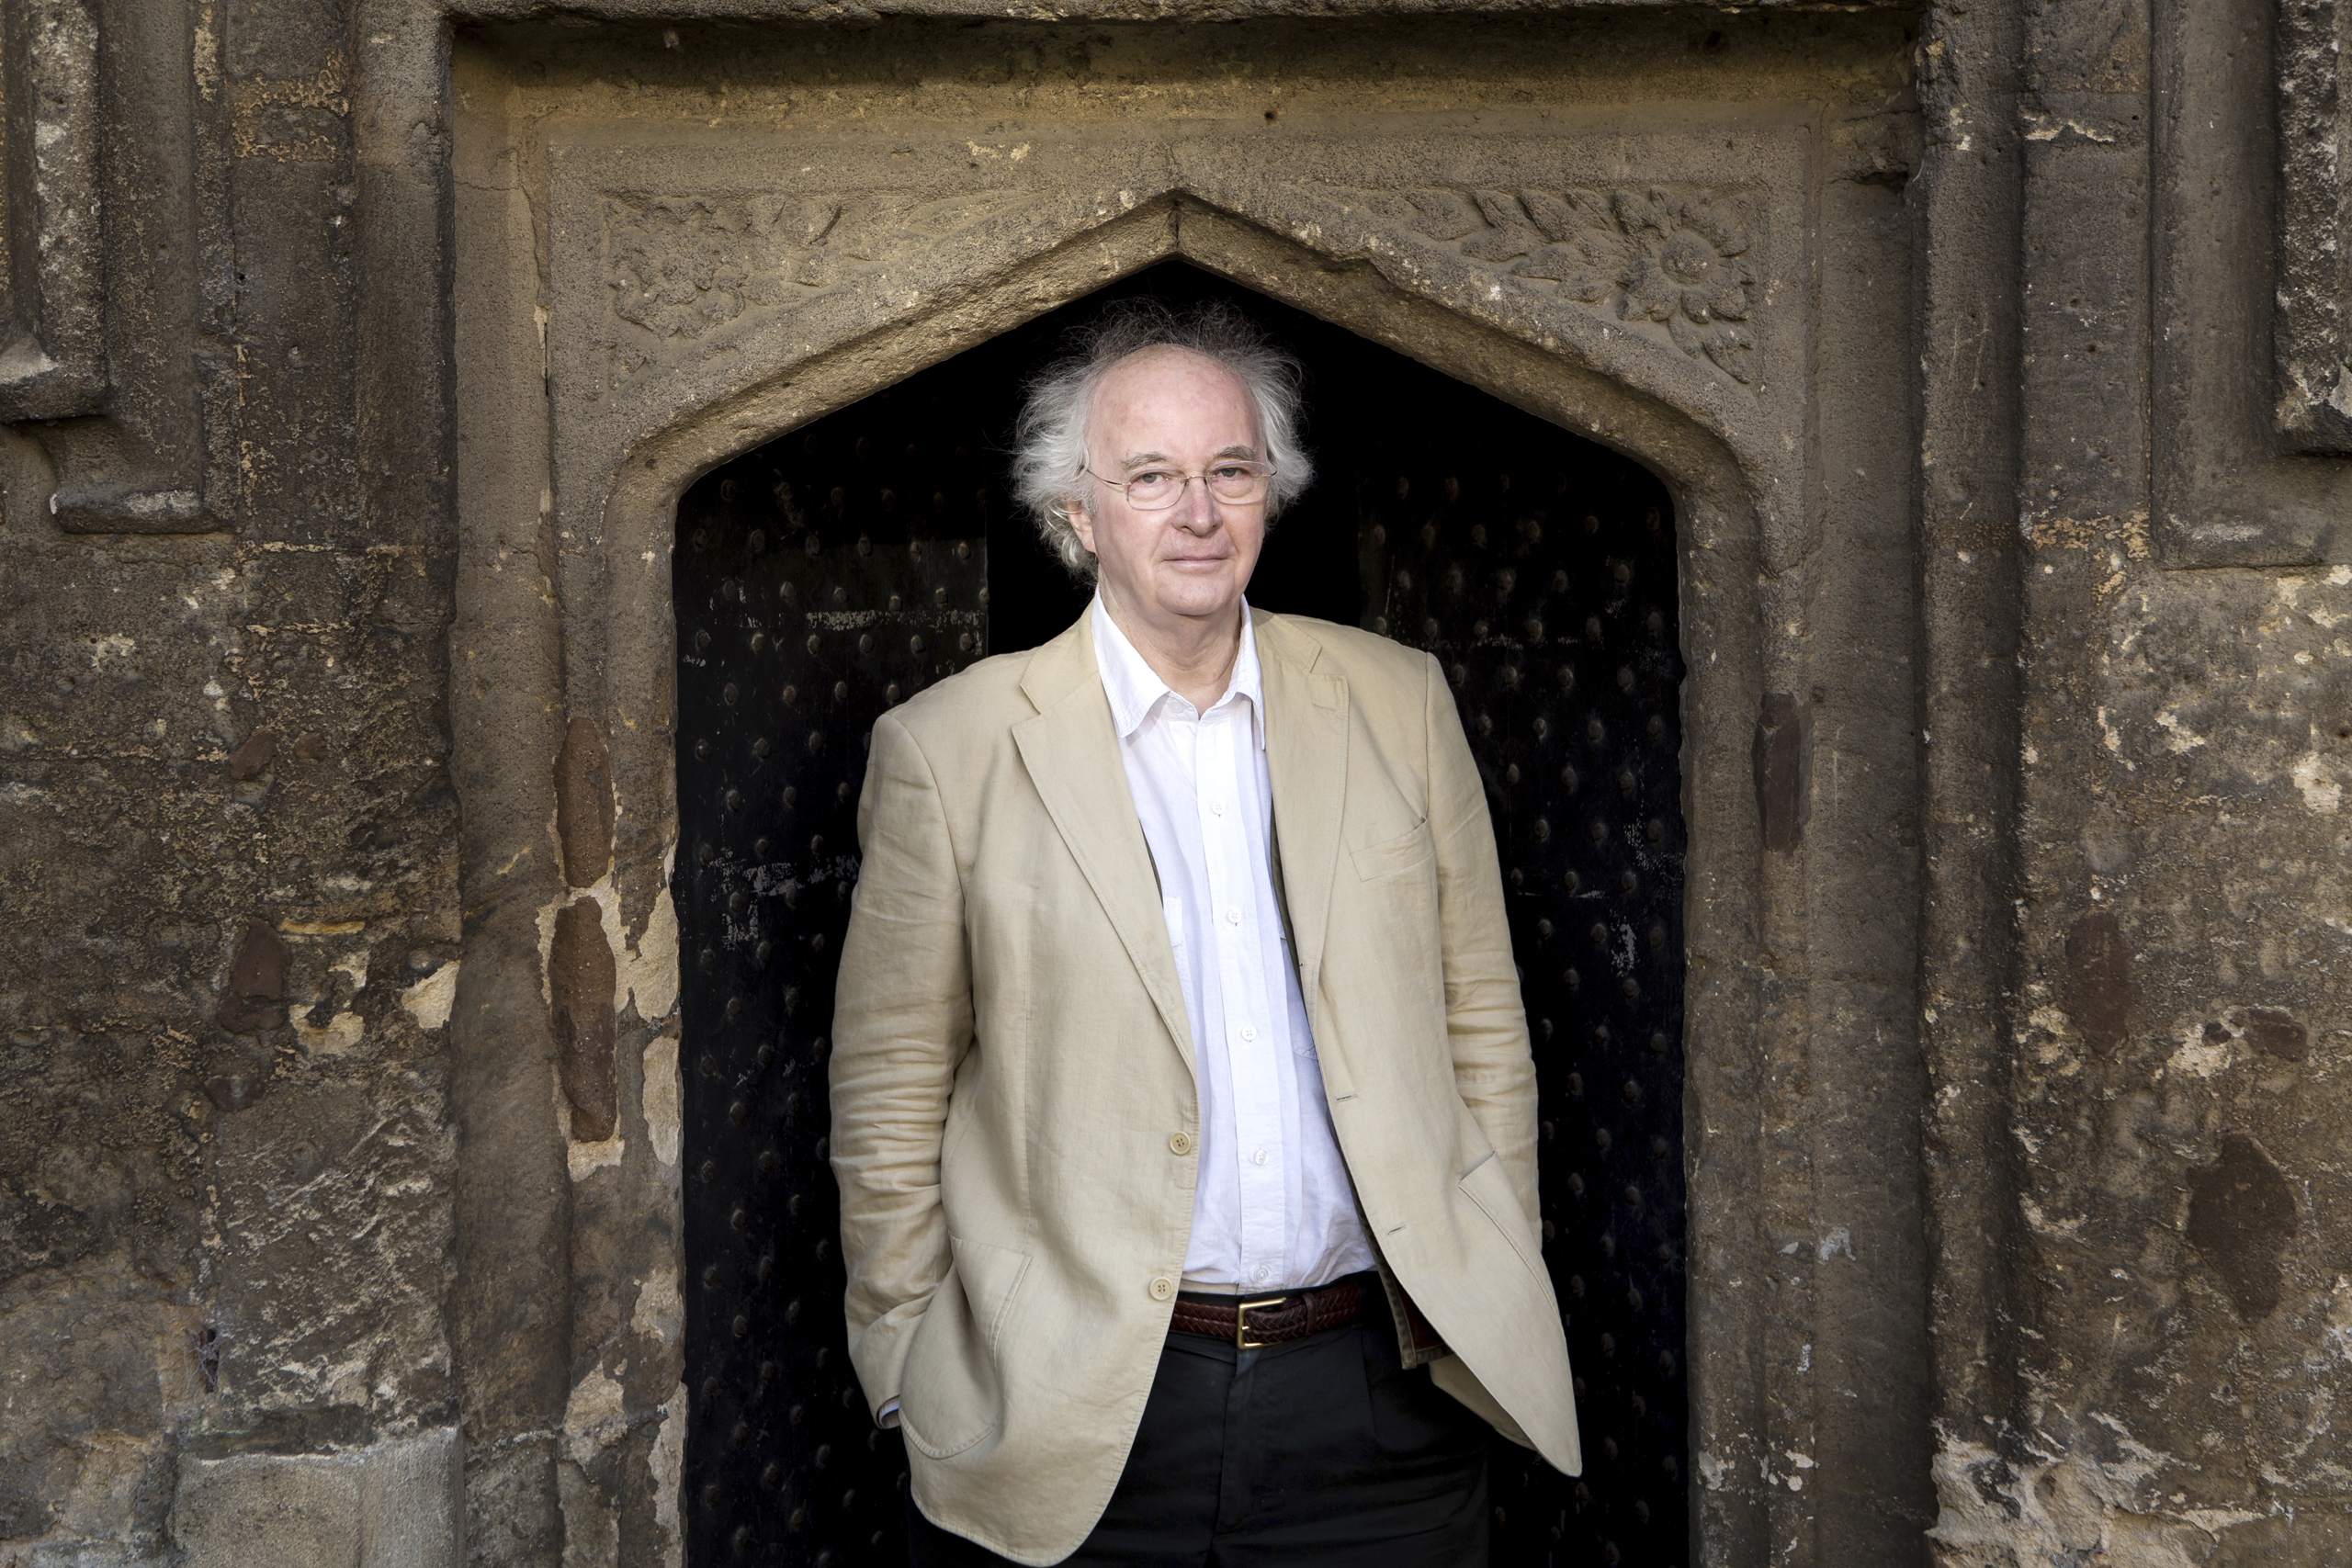 Philip Pullman poses for a photograph outside of Worcester College, in Oxford, England on Jan. 11, 2017. (Michael Leckie—Penguin Random House/AP)